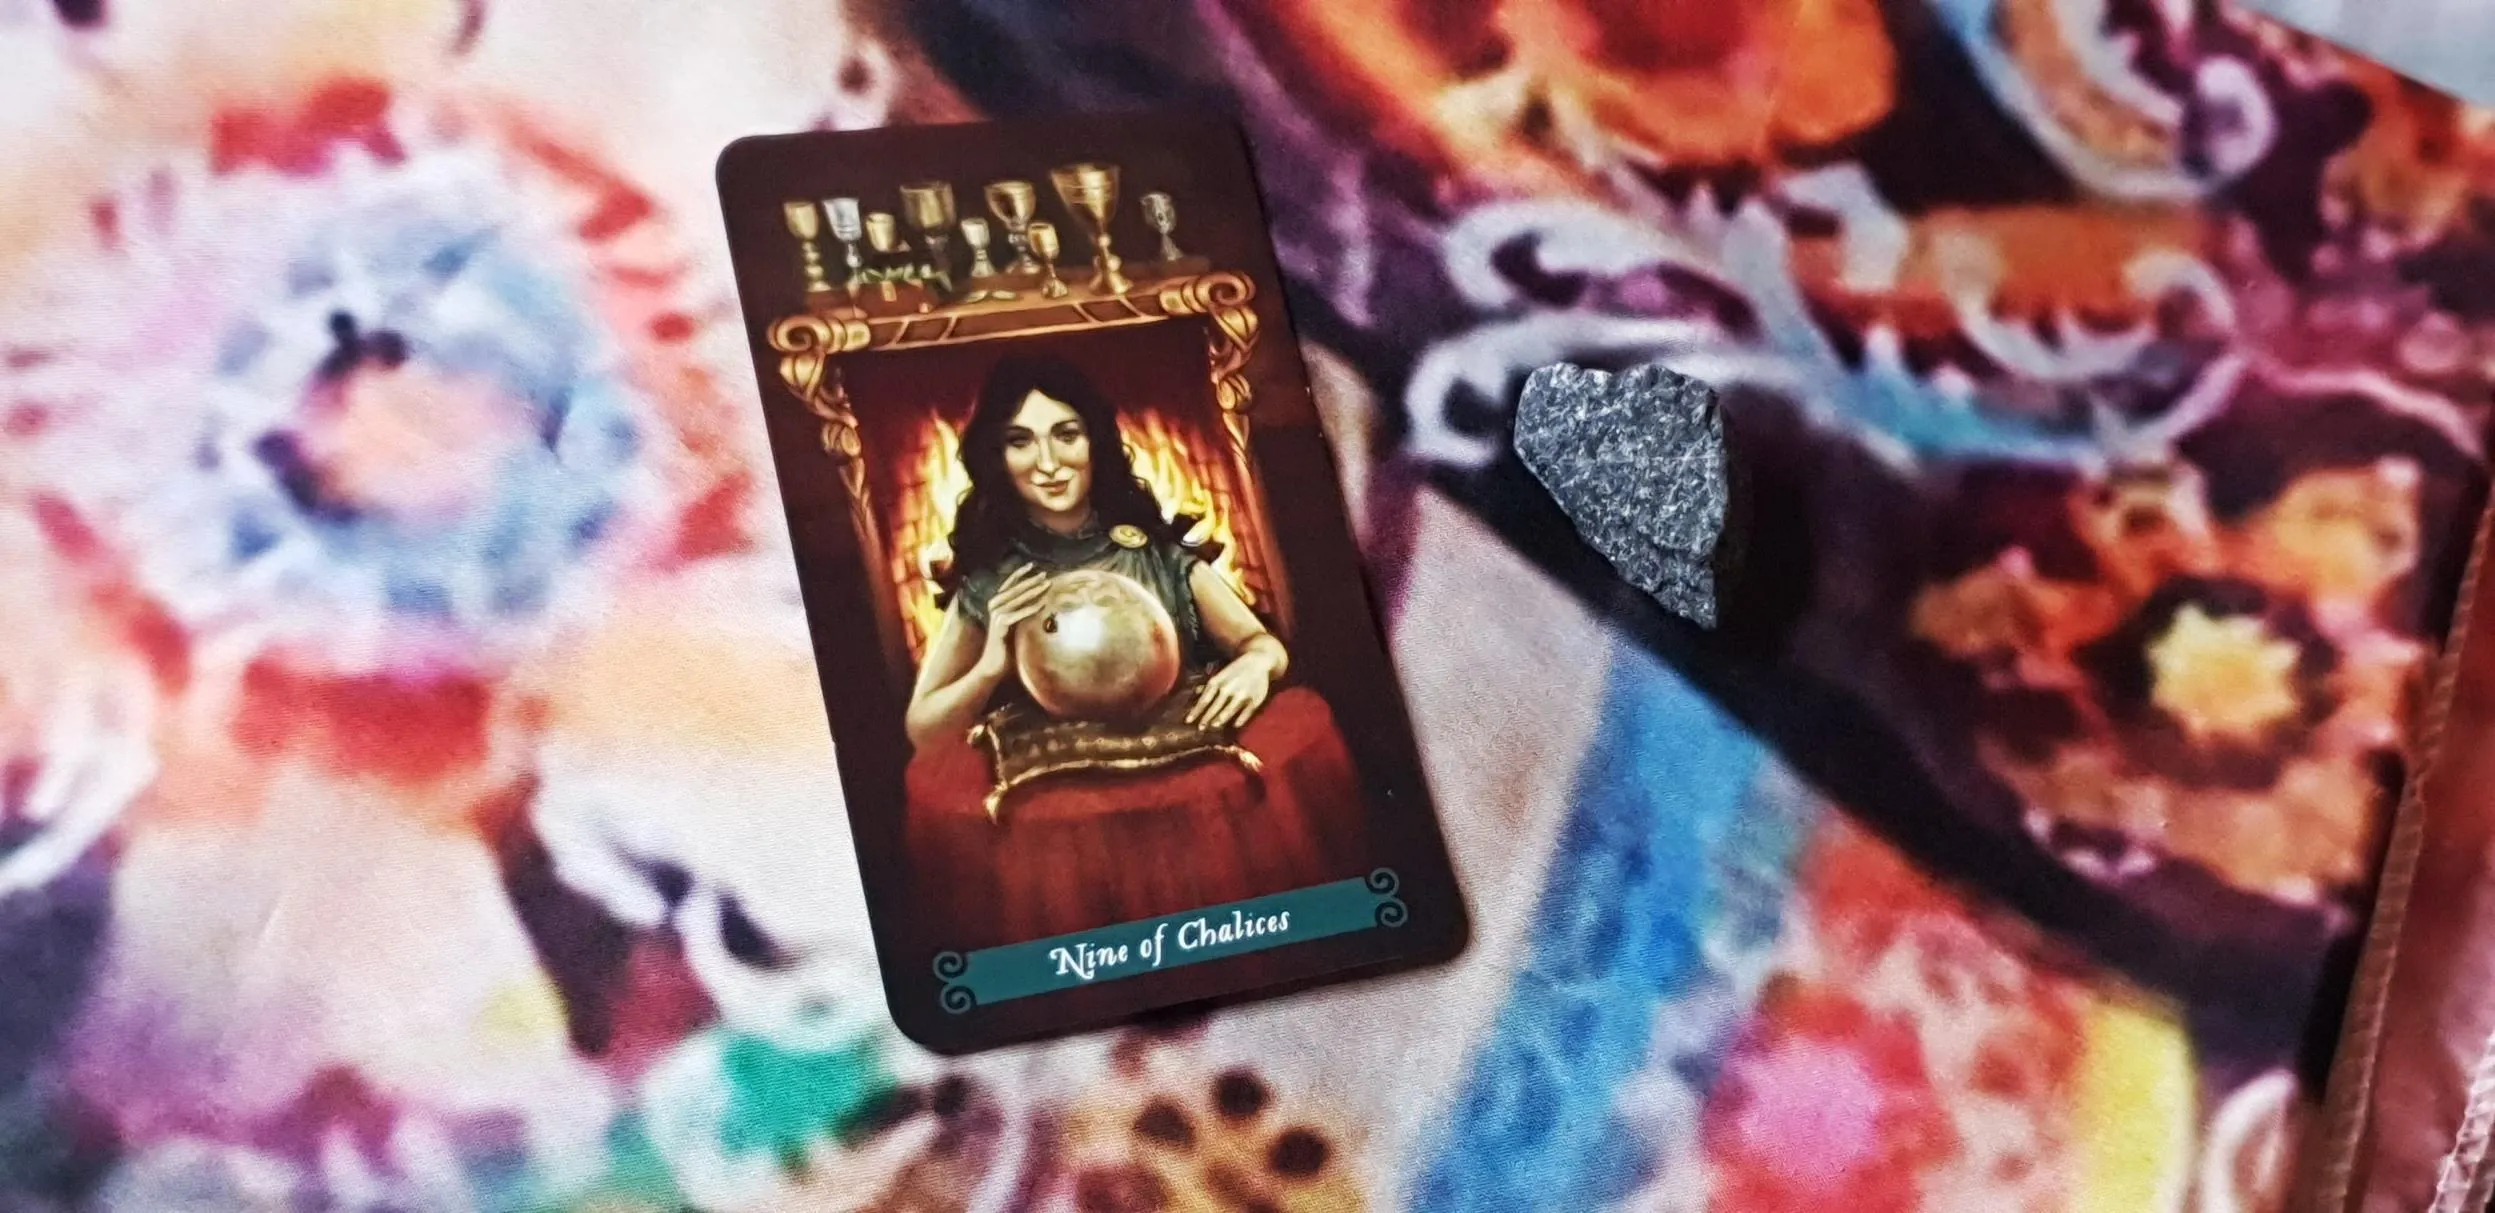 9 of Chalices - The Green Witch Tarot